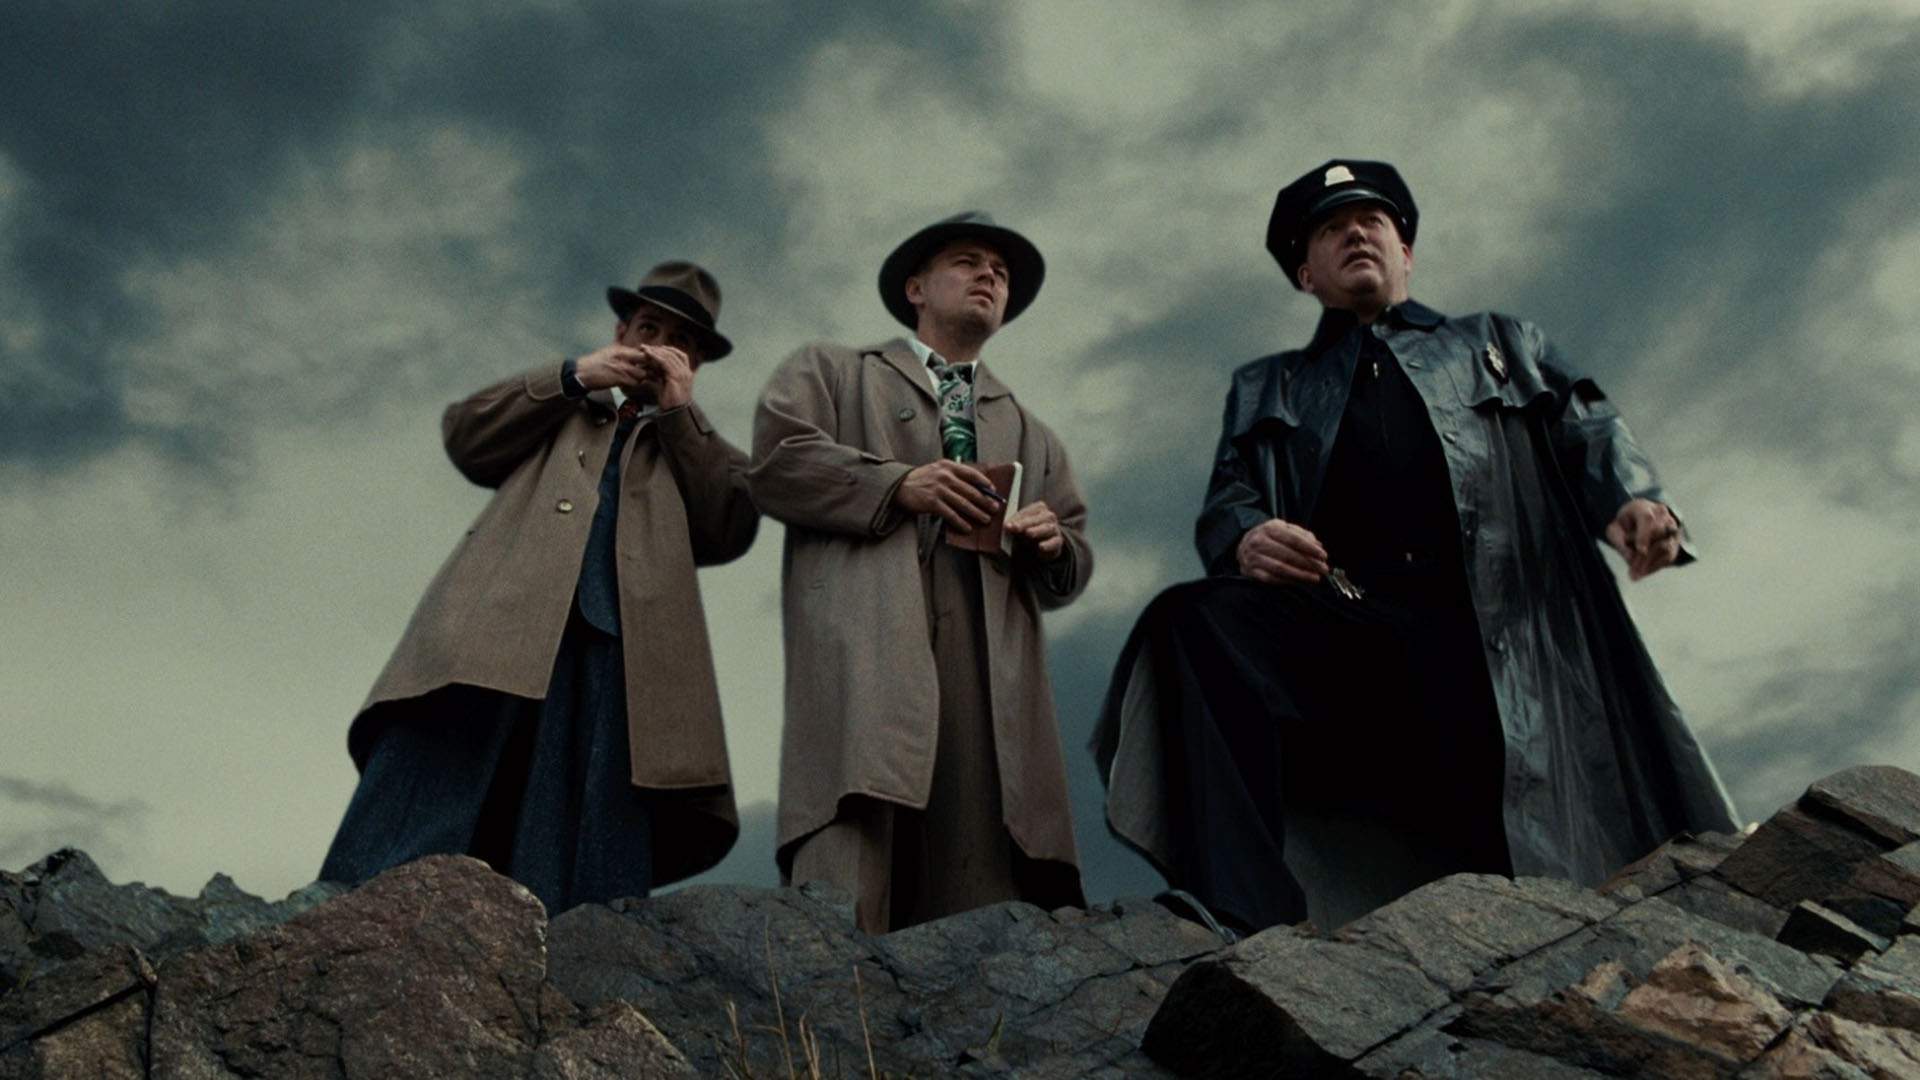 THE SHUTTER ISLAND EXPERIENCE